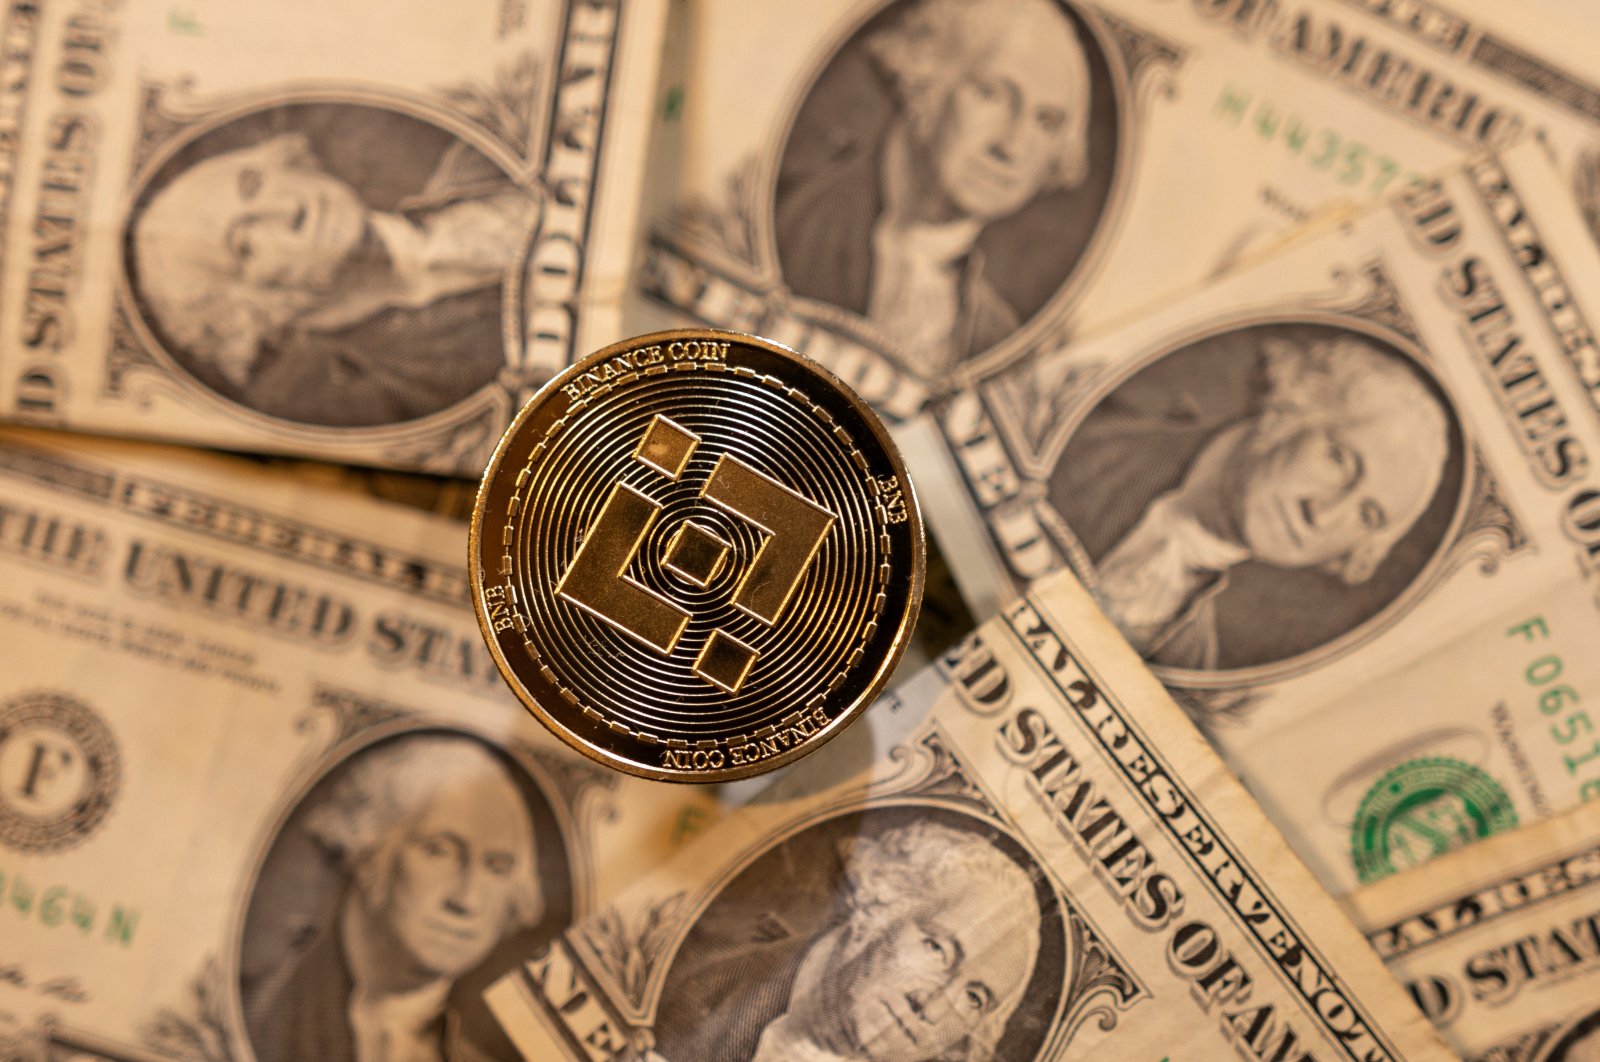 A representation of the virtual cryptocurrency Binance is placed on U.S. dollar banknotes in this illustration taken Nov. 28, 2021. (Reuters Photo)